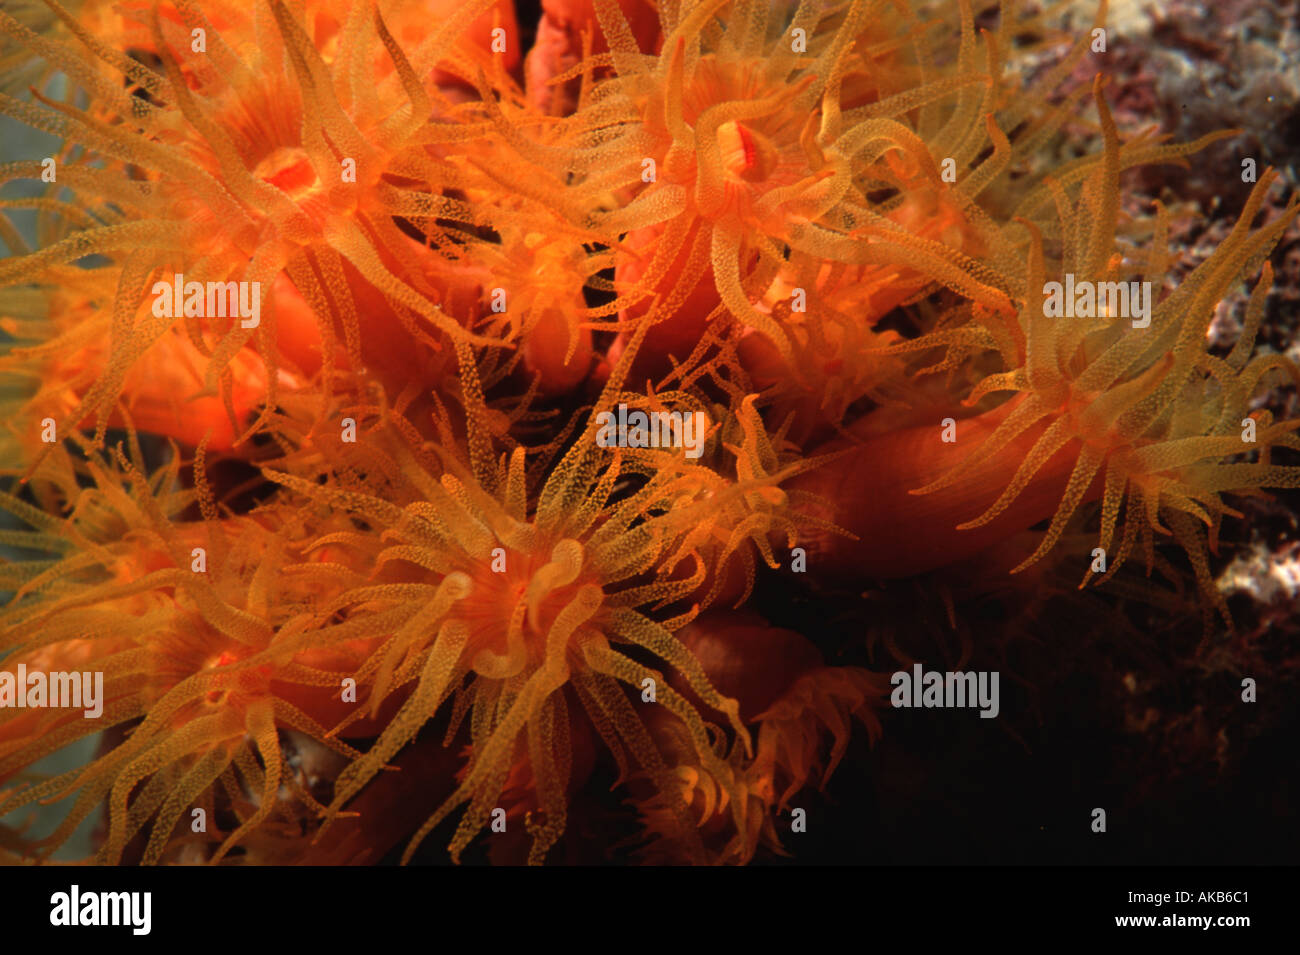 Vivid bursting hues of oranges and yellows are commonly found in orange cup coral at night when feeding Stock Photo